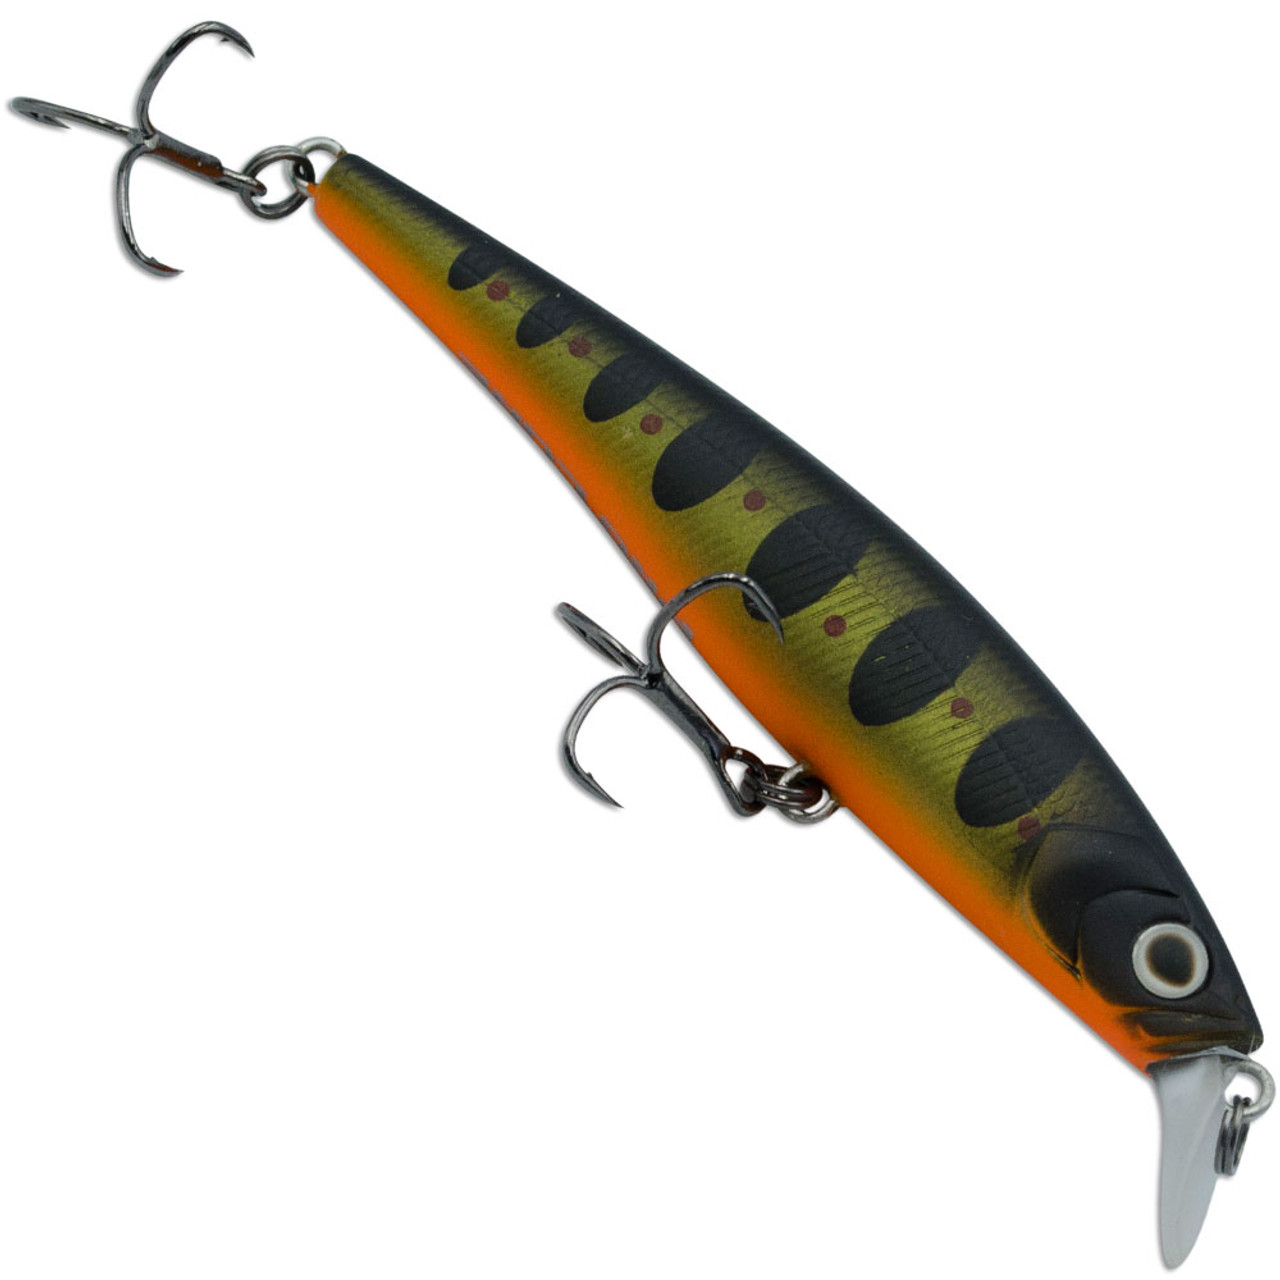 Pro Lure ST72 Minnow - Deep (Crimson Spot) – Trophy Trout Lures and Fly  Fishing